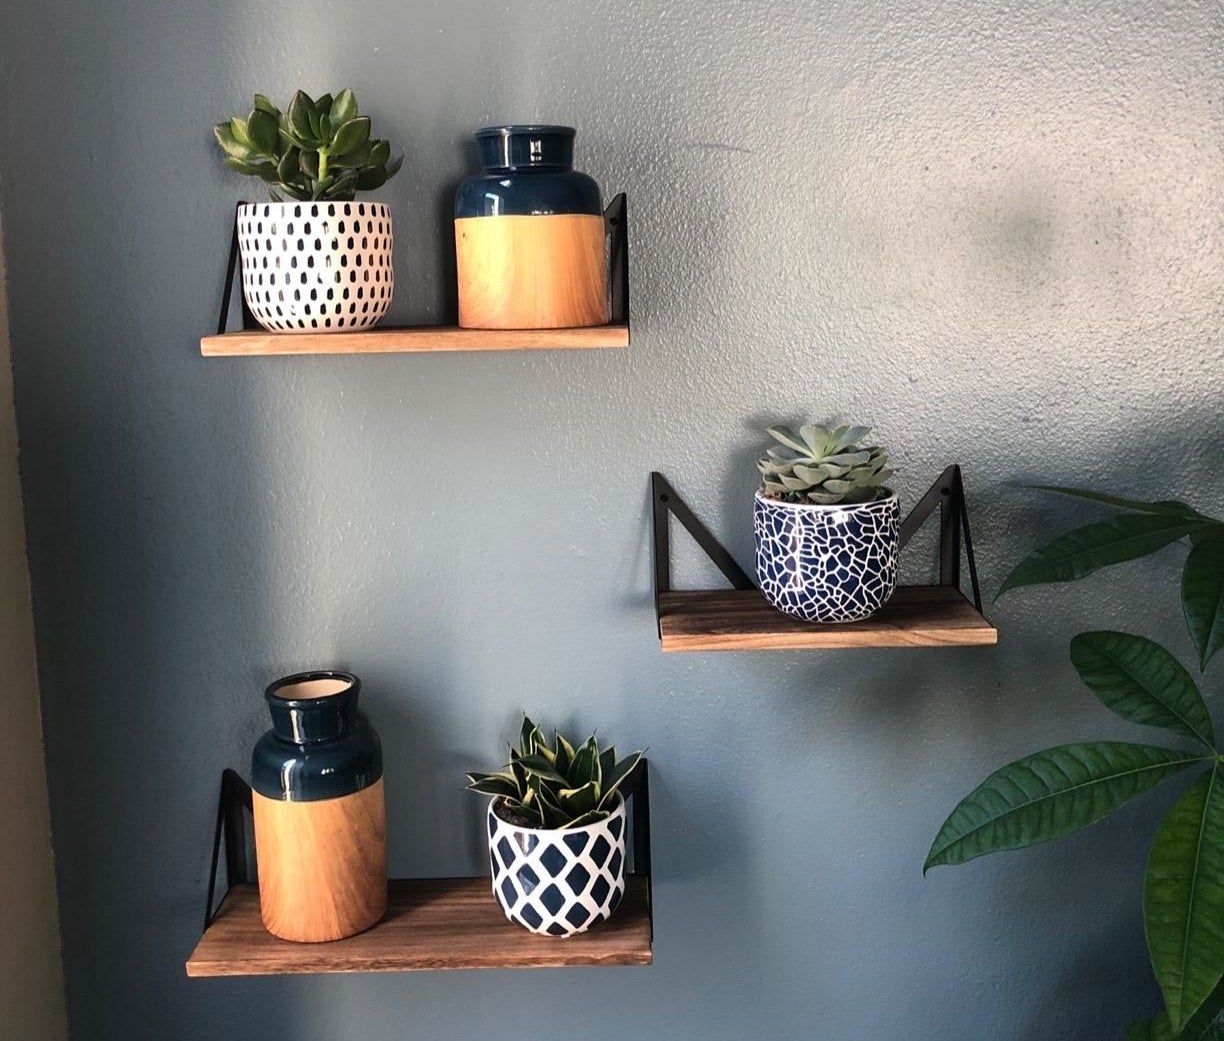 the three shelves hanging on a wall holding small planters